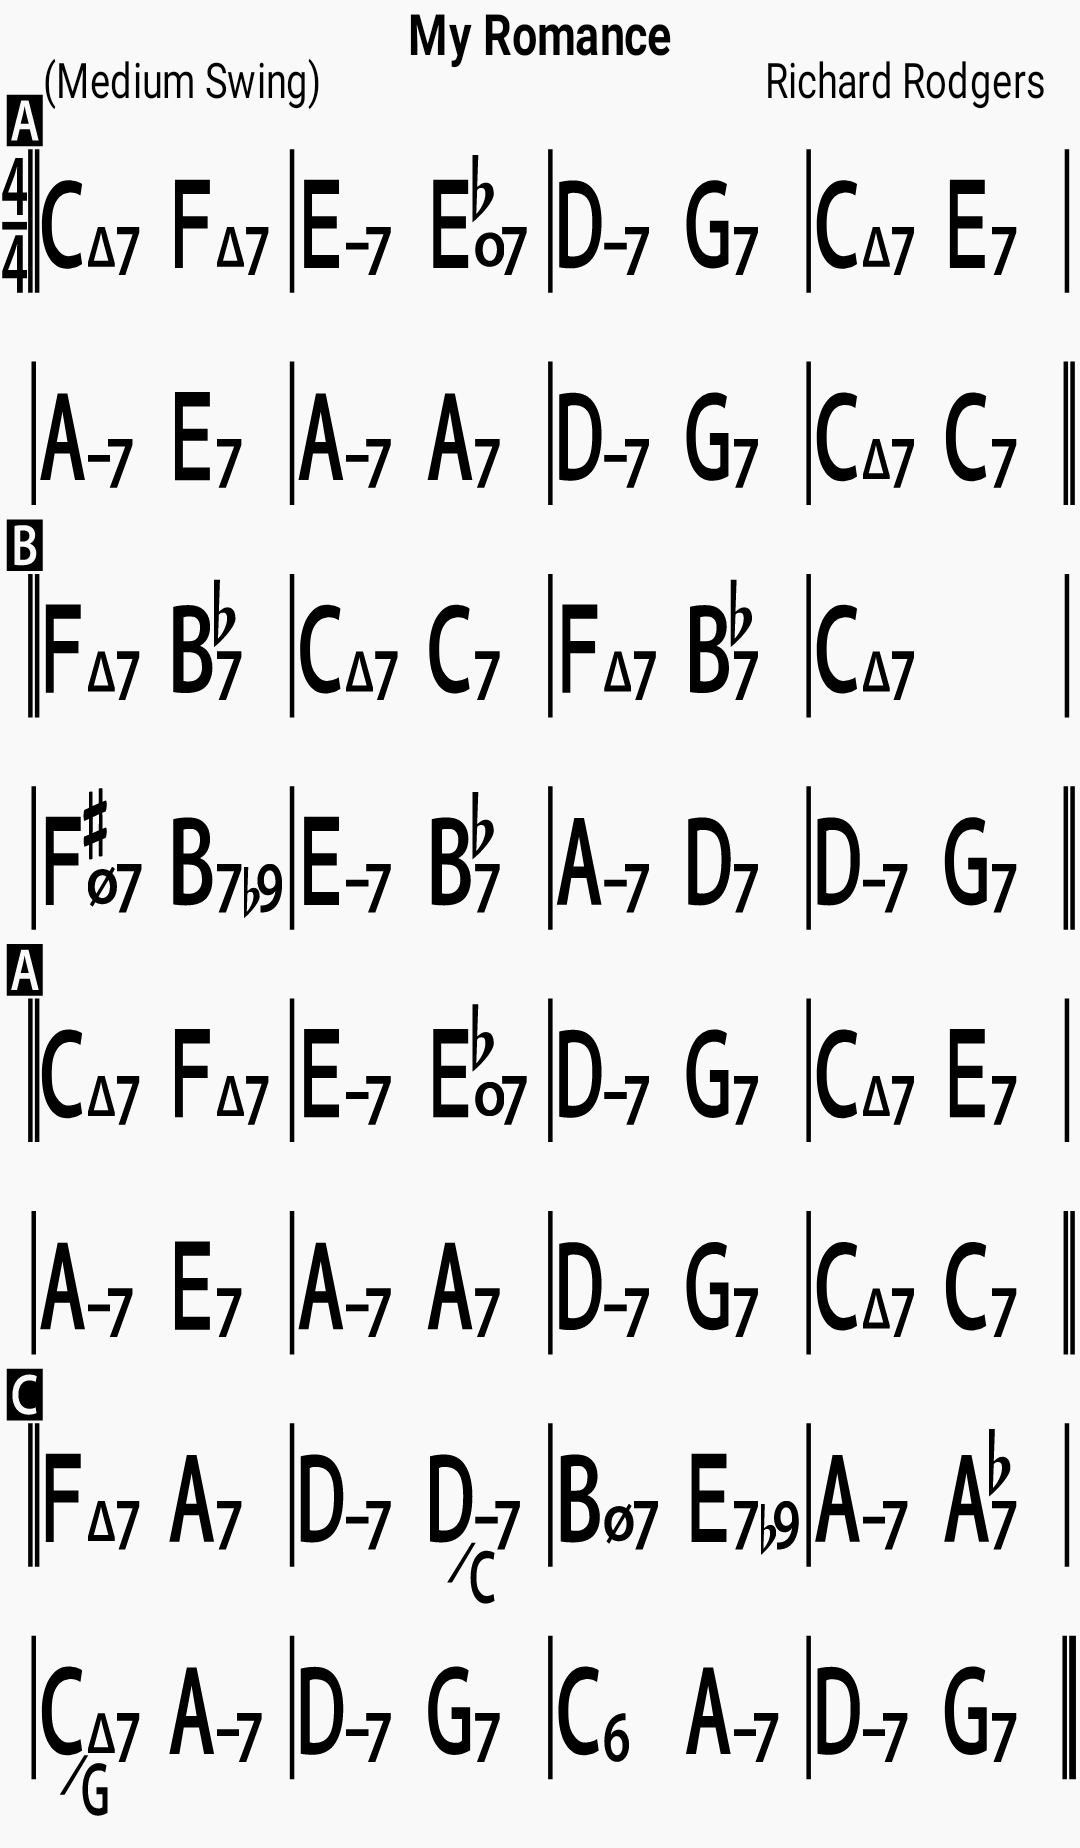 Chord chart for the jazz standard My Romance